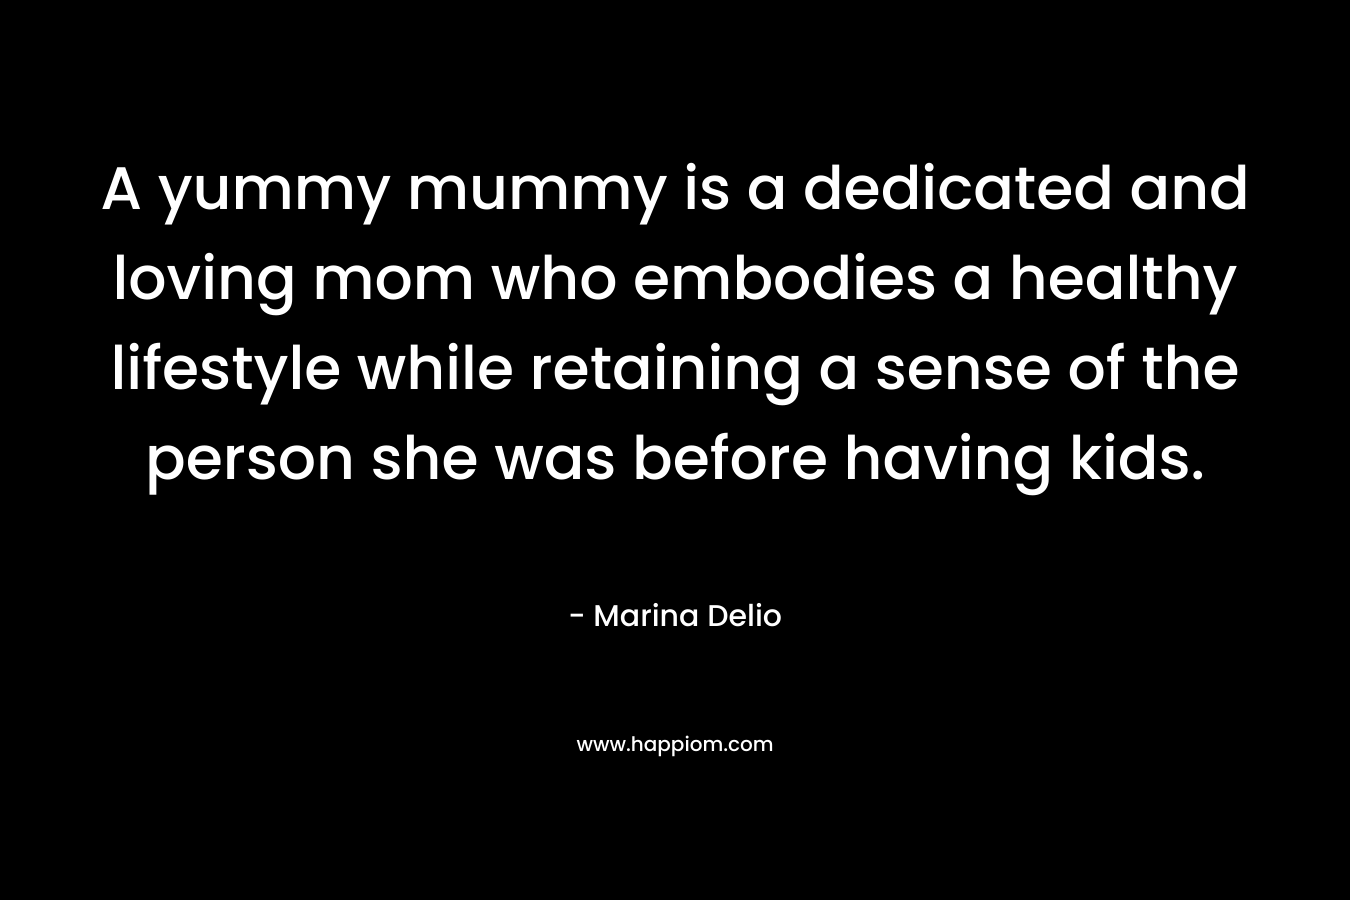 A yummy mummy is a dedicated and loving mom who embodies a healthy lifestyle while retaining a sense of the person she was before having kids. – Marina Delio